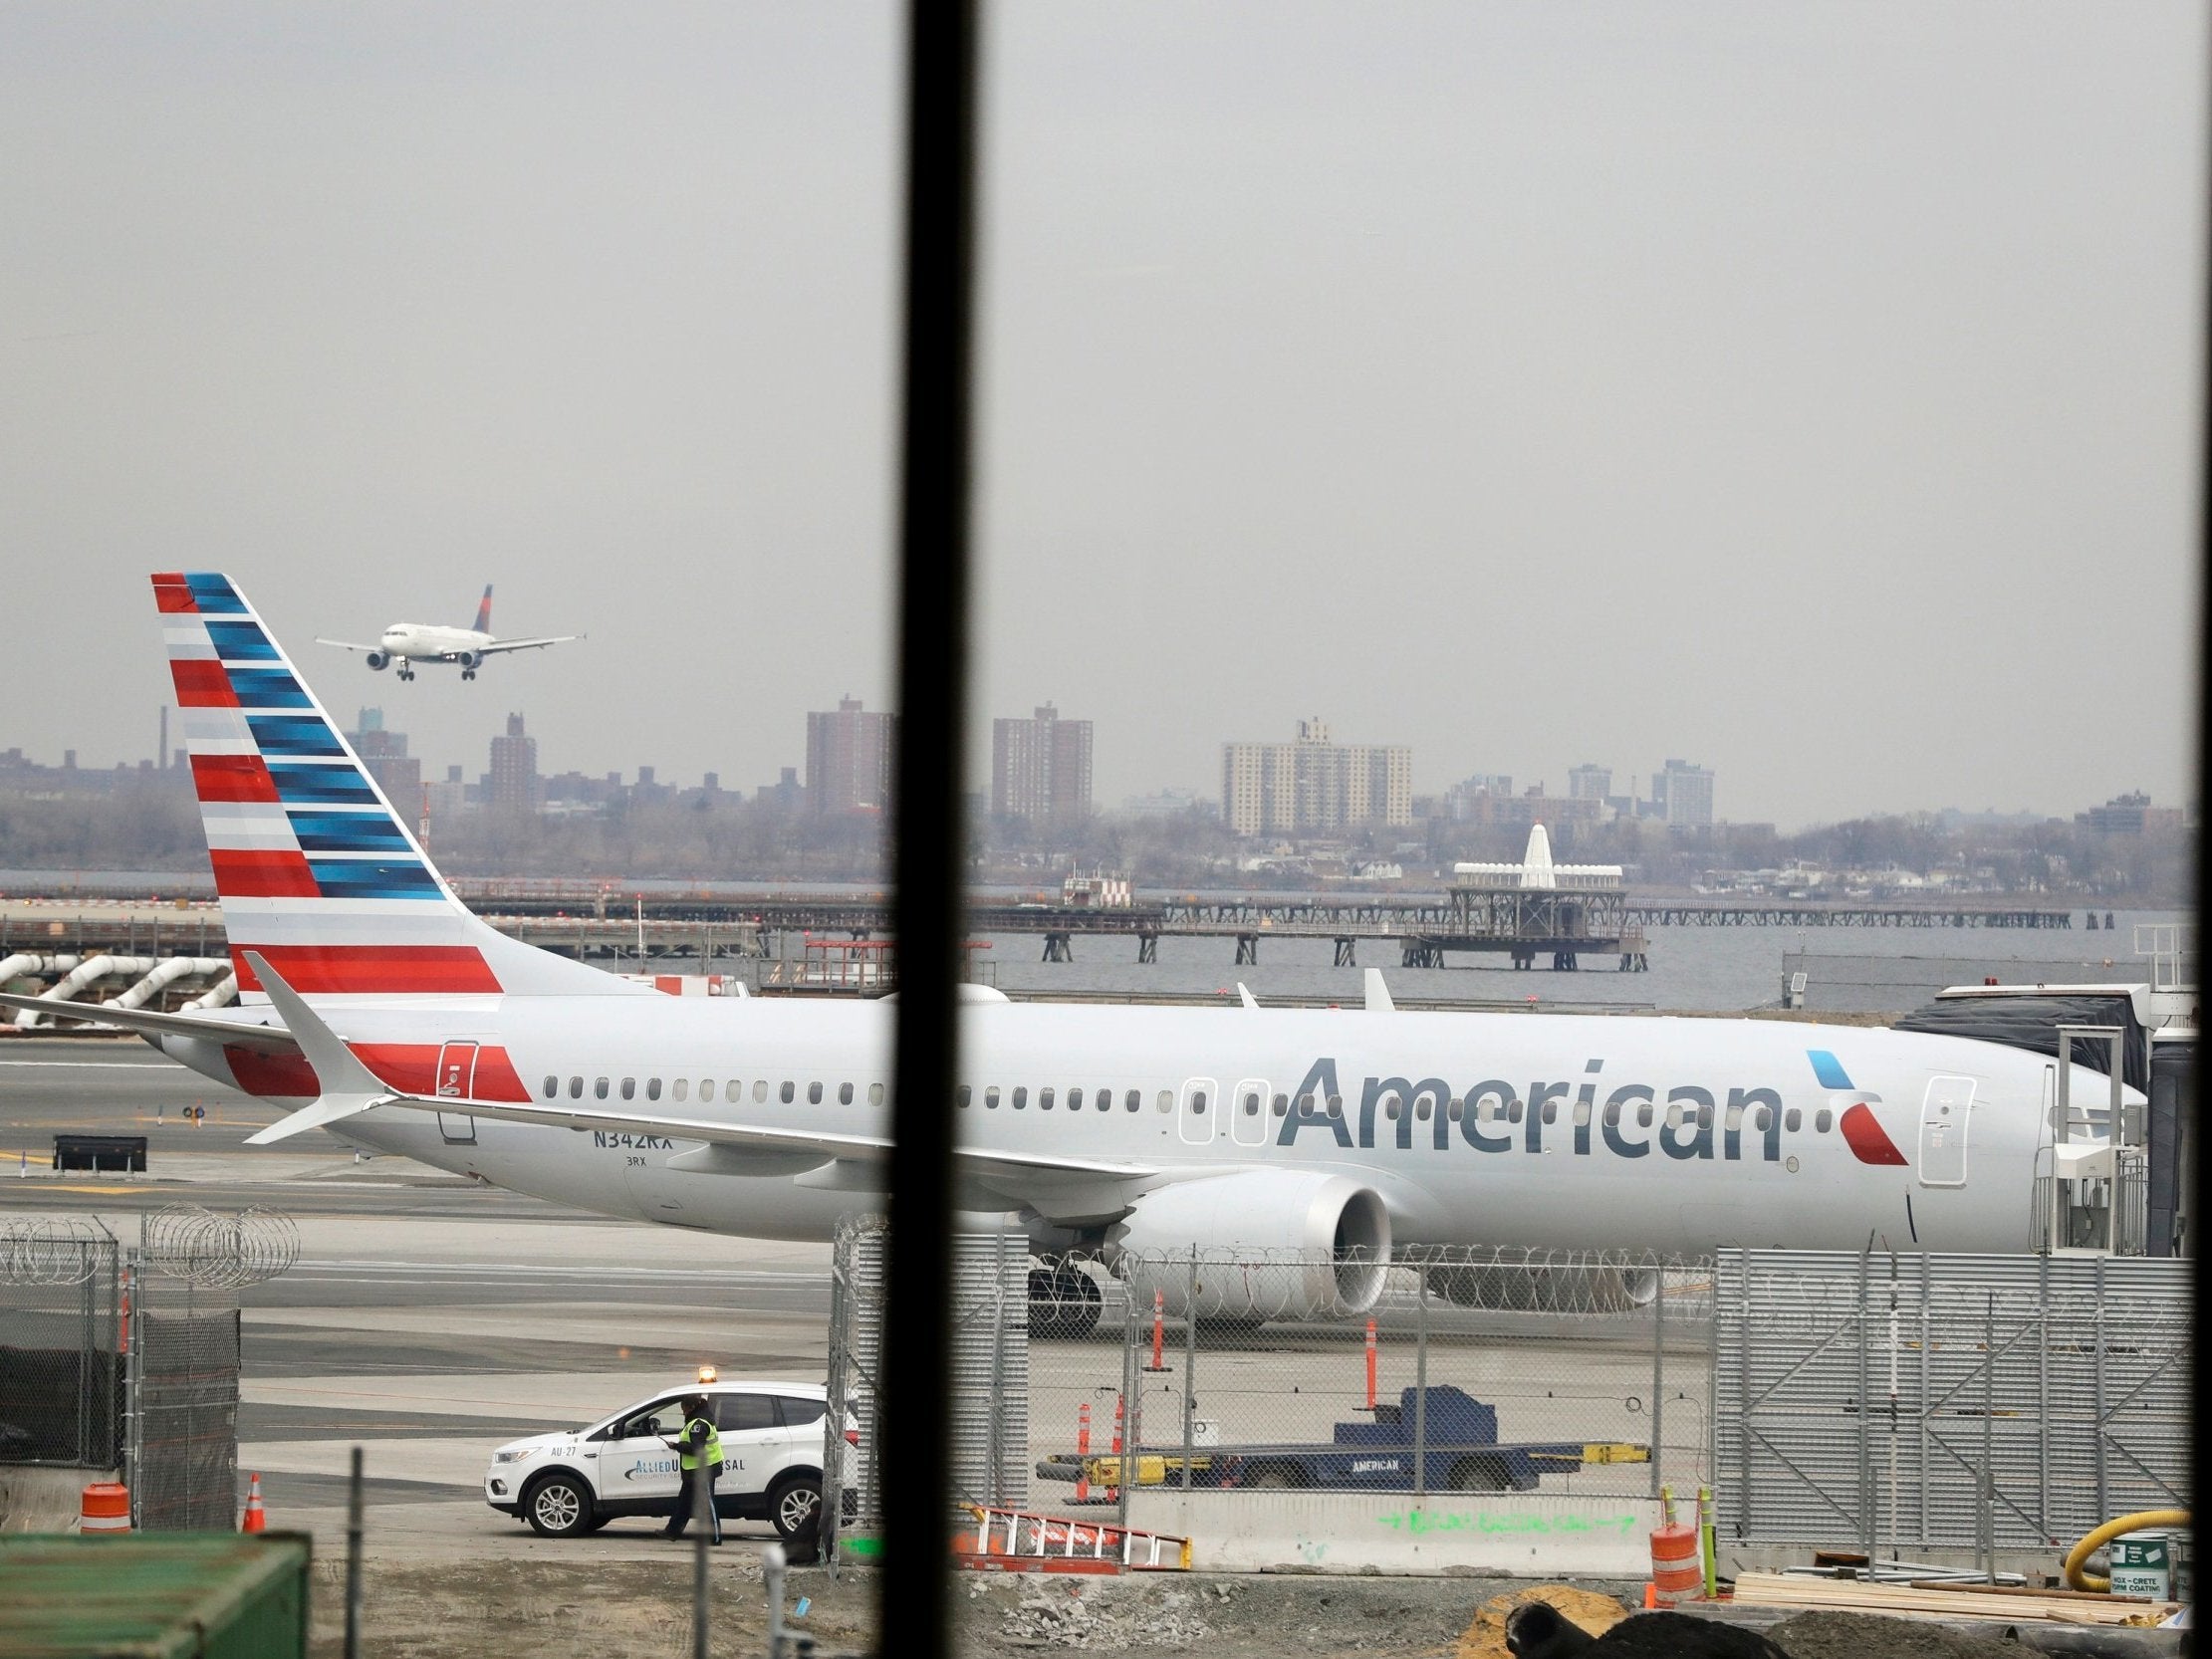 File image of American Airlines Boeing 737 Max 8 plane.